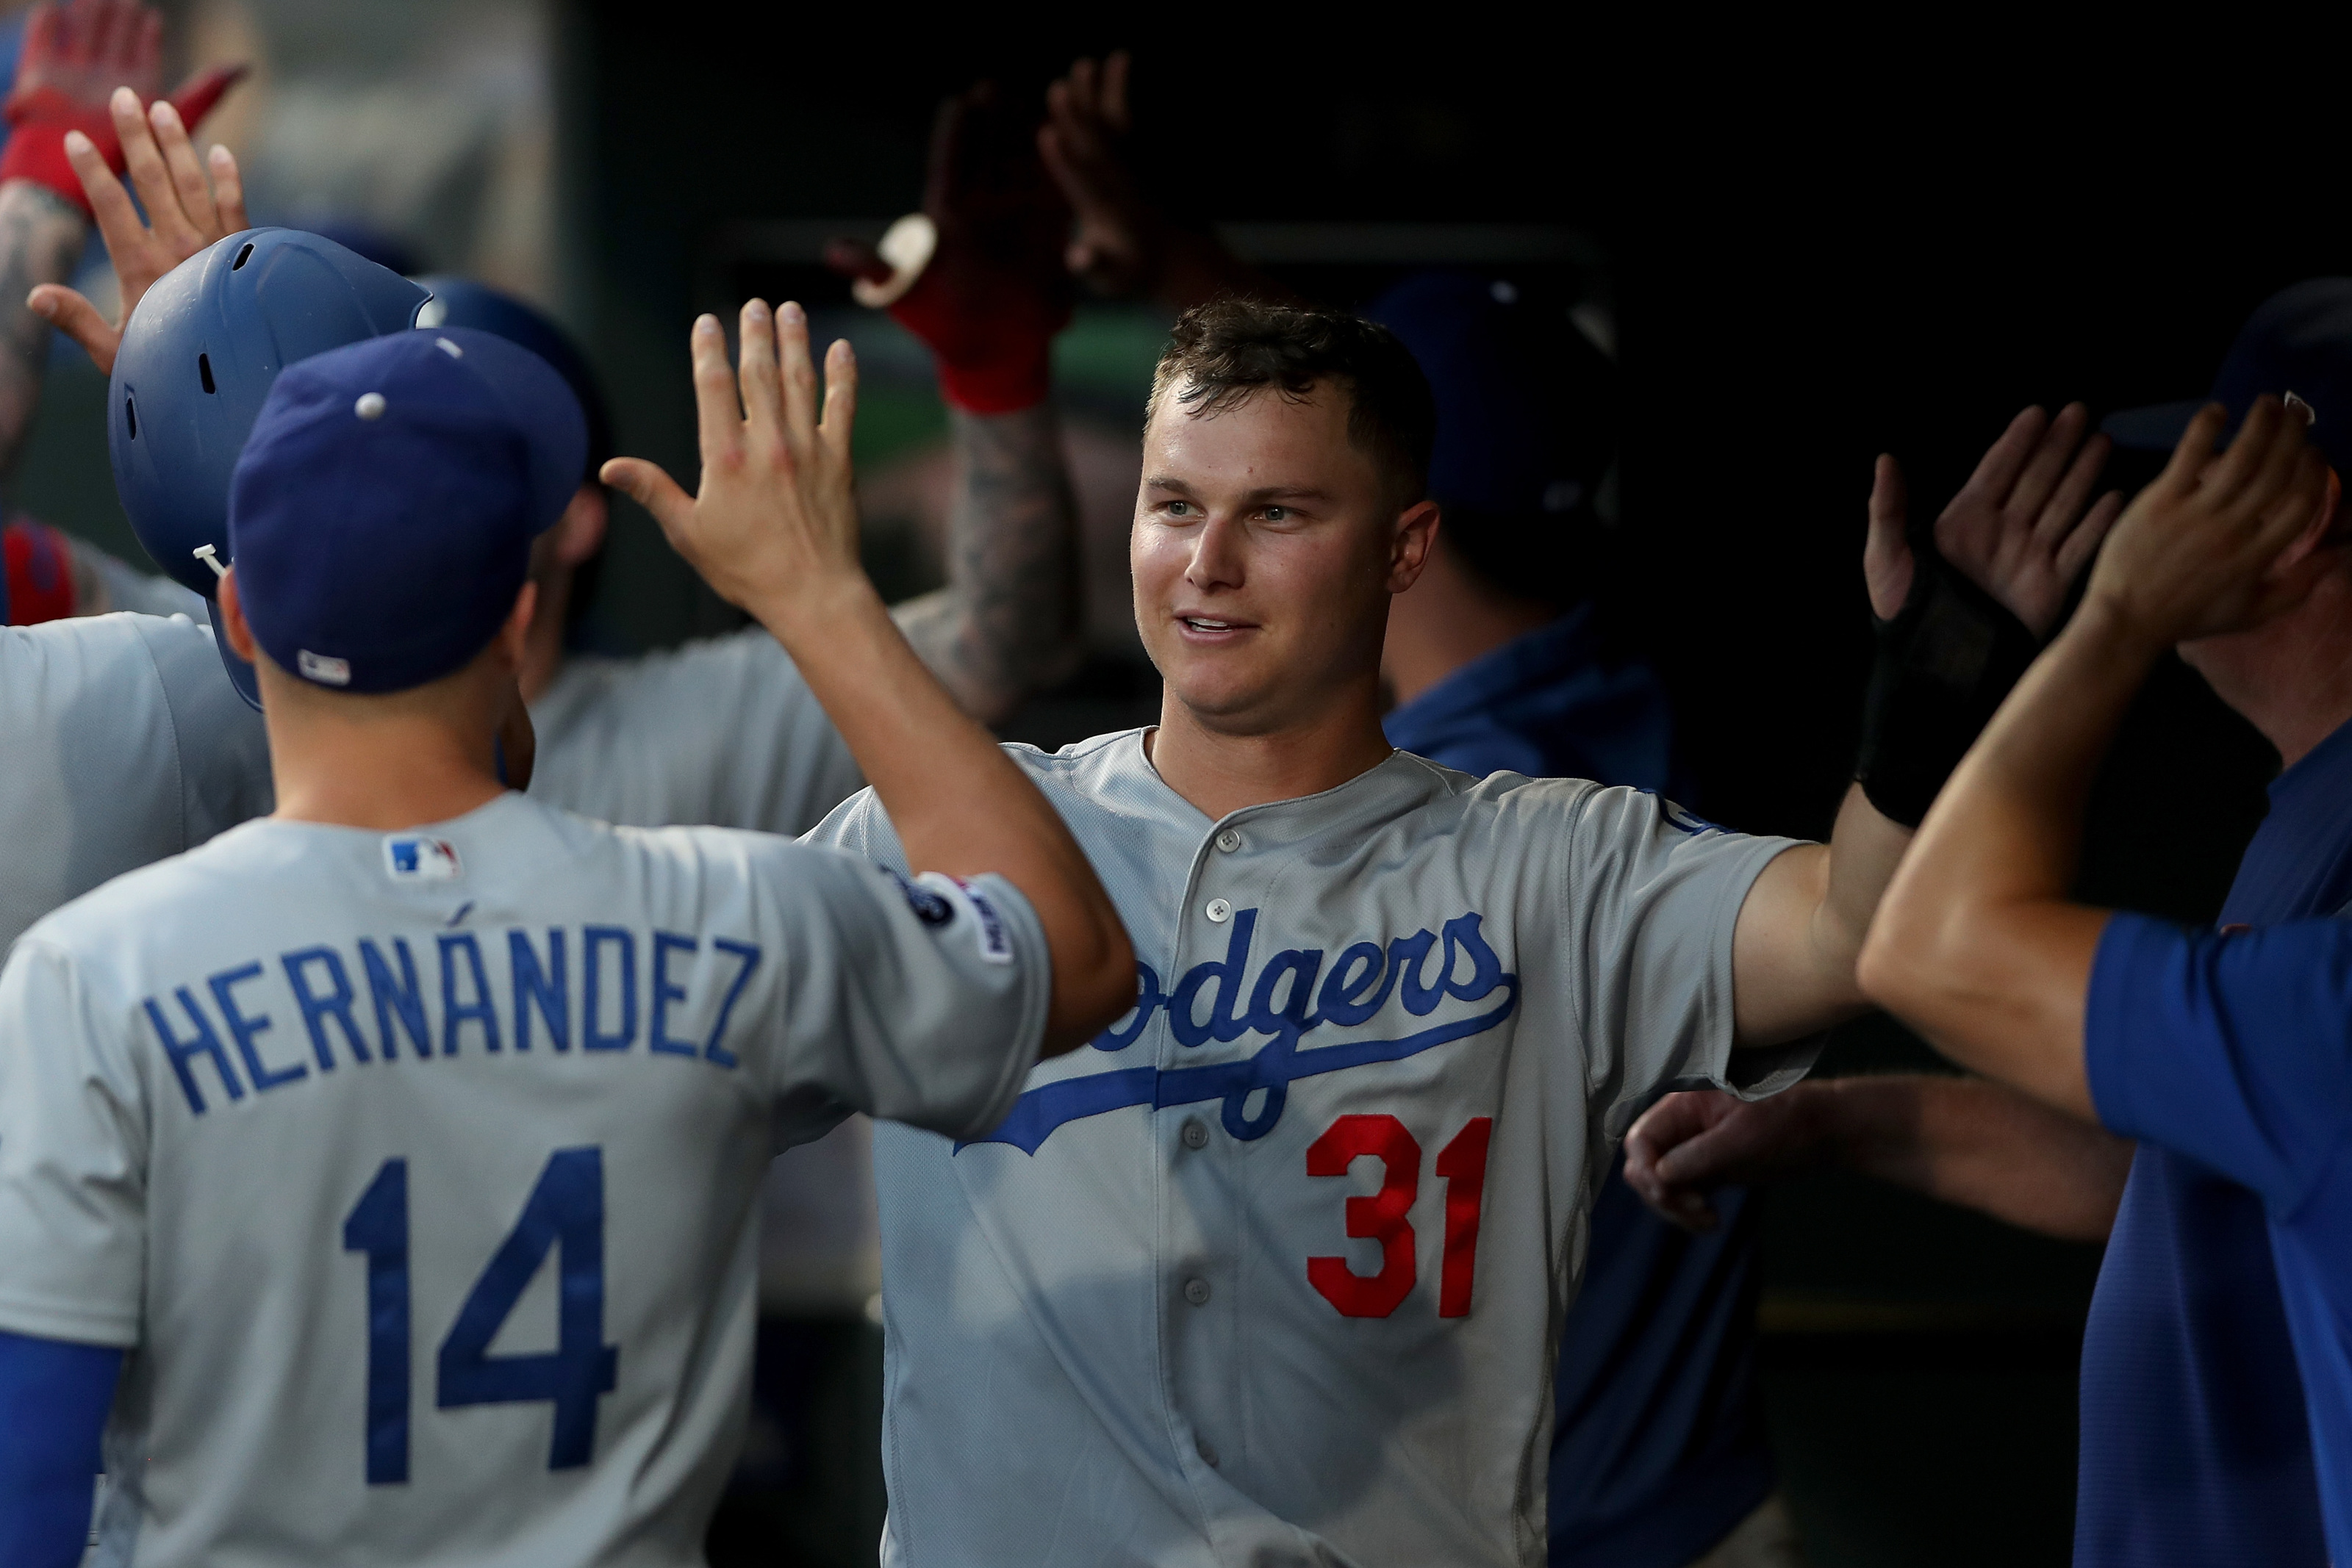 Los Angeles Dodgers: Looking for 13 in a row against the Rockies